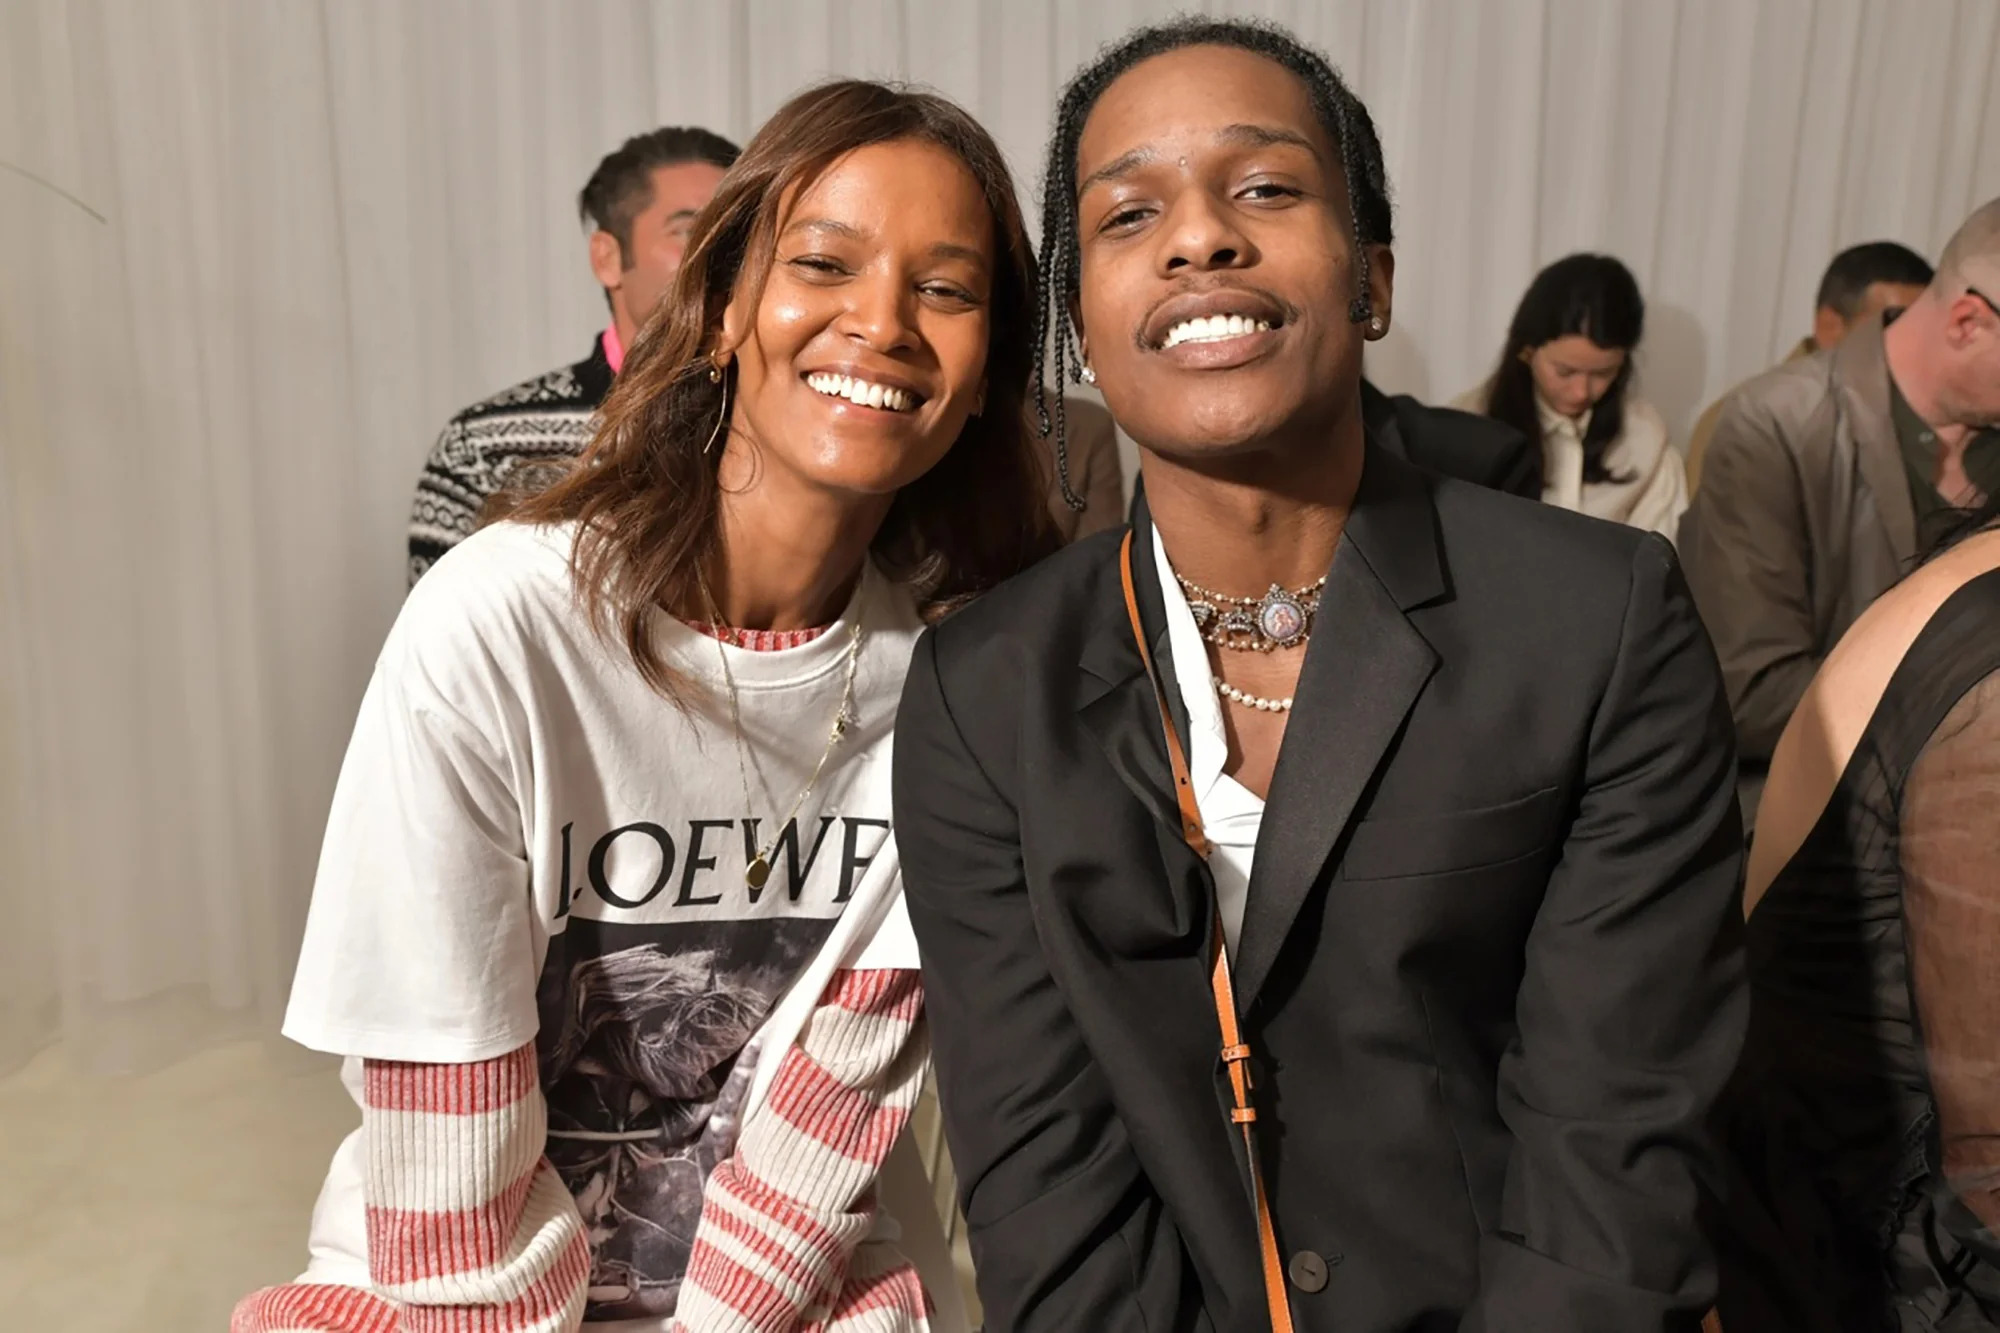 Liya Kebede and A$AP Rocky at the Loewe Fashion Show in Paris.